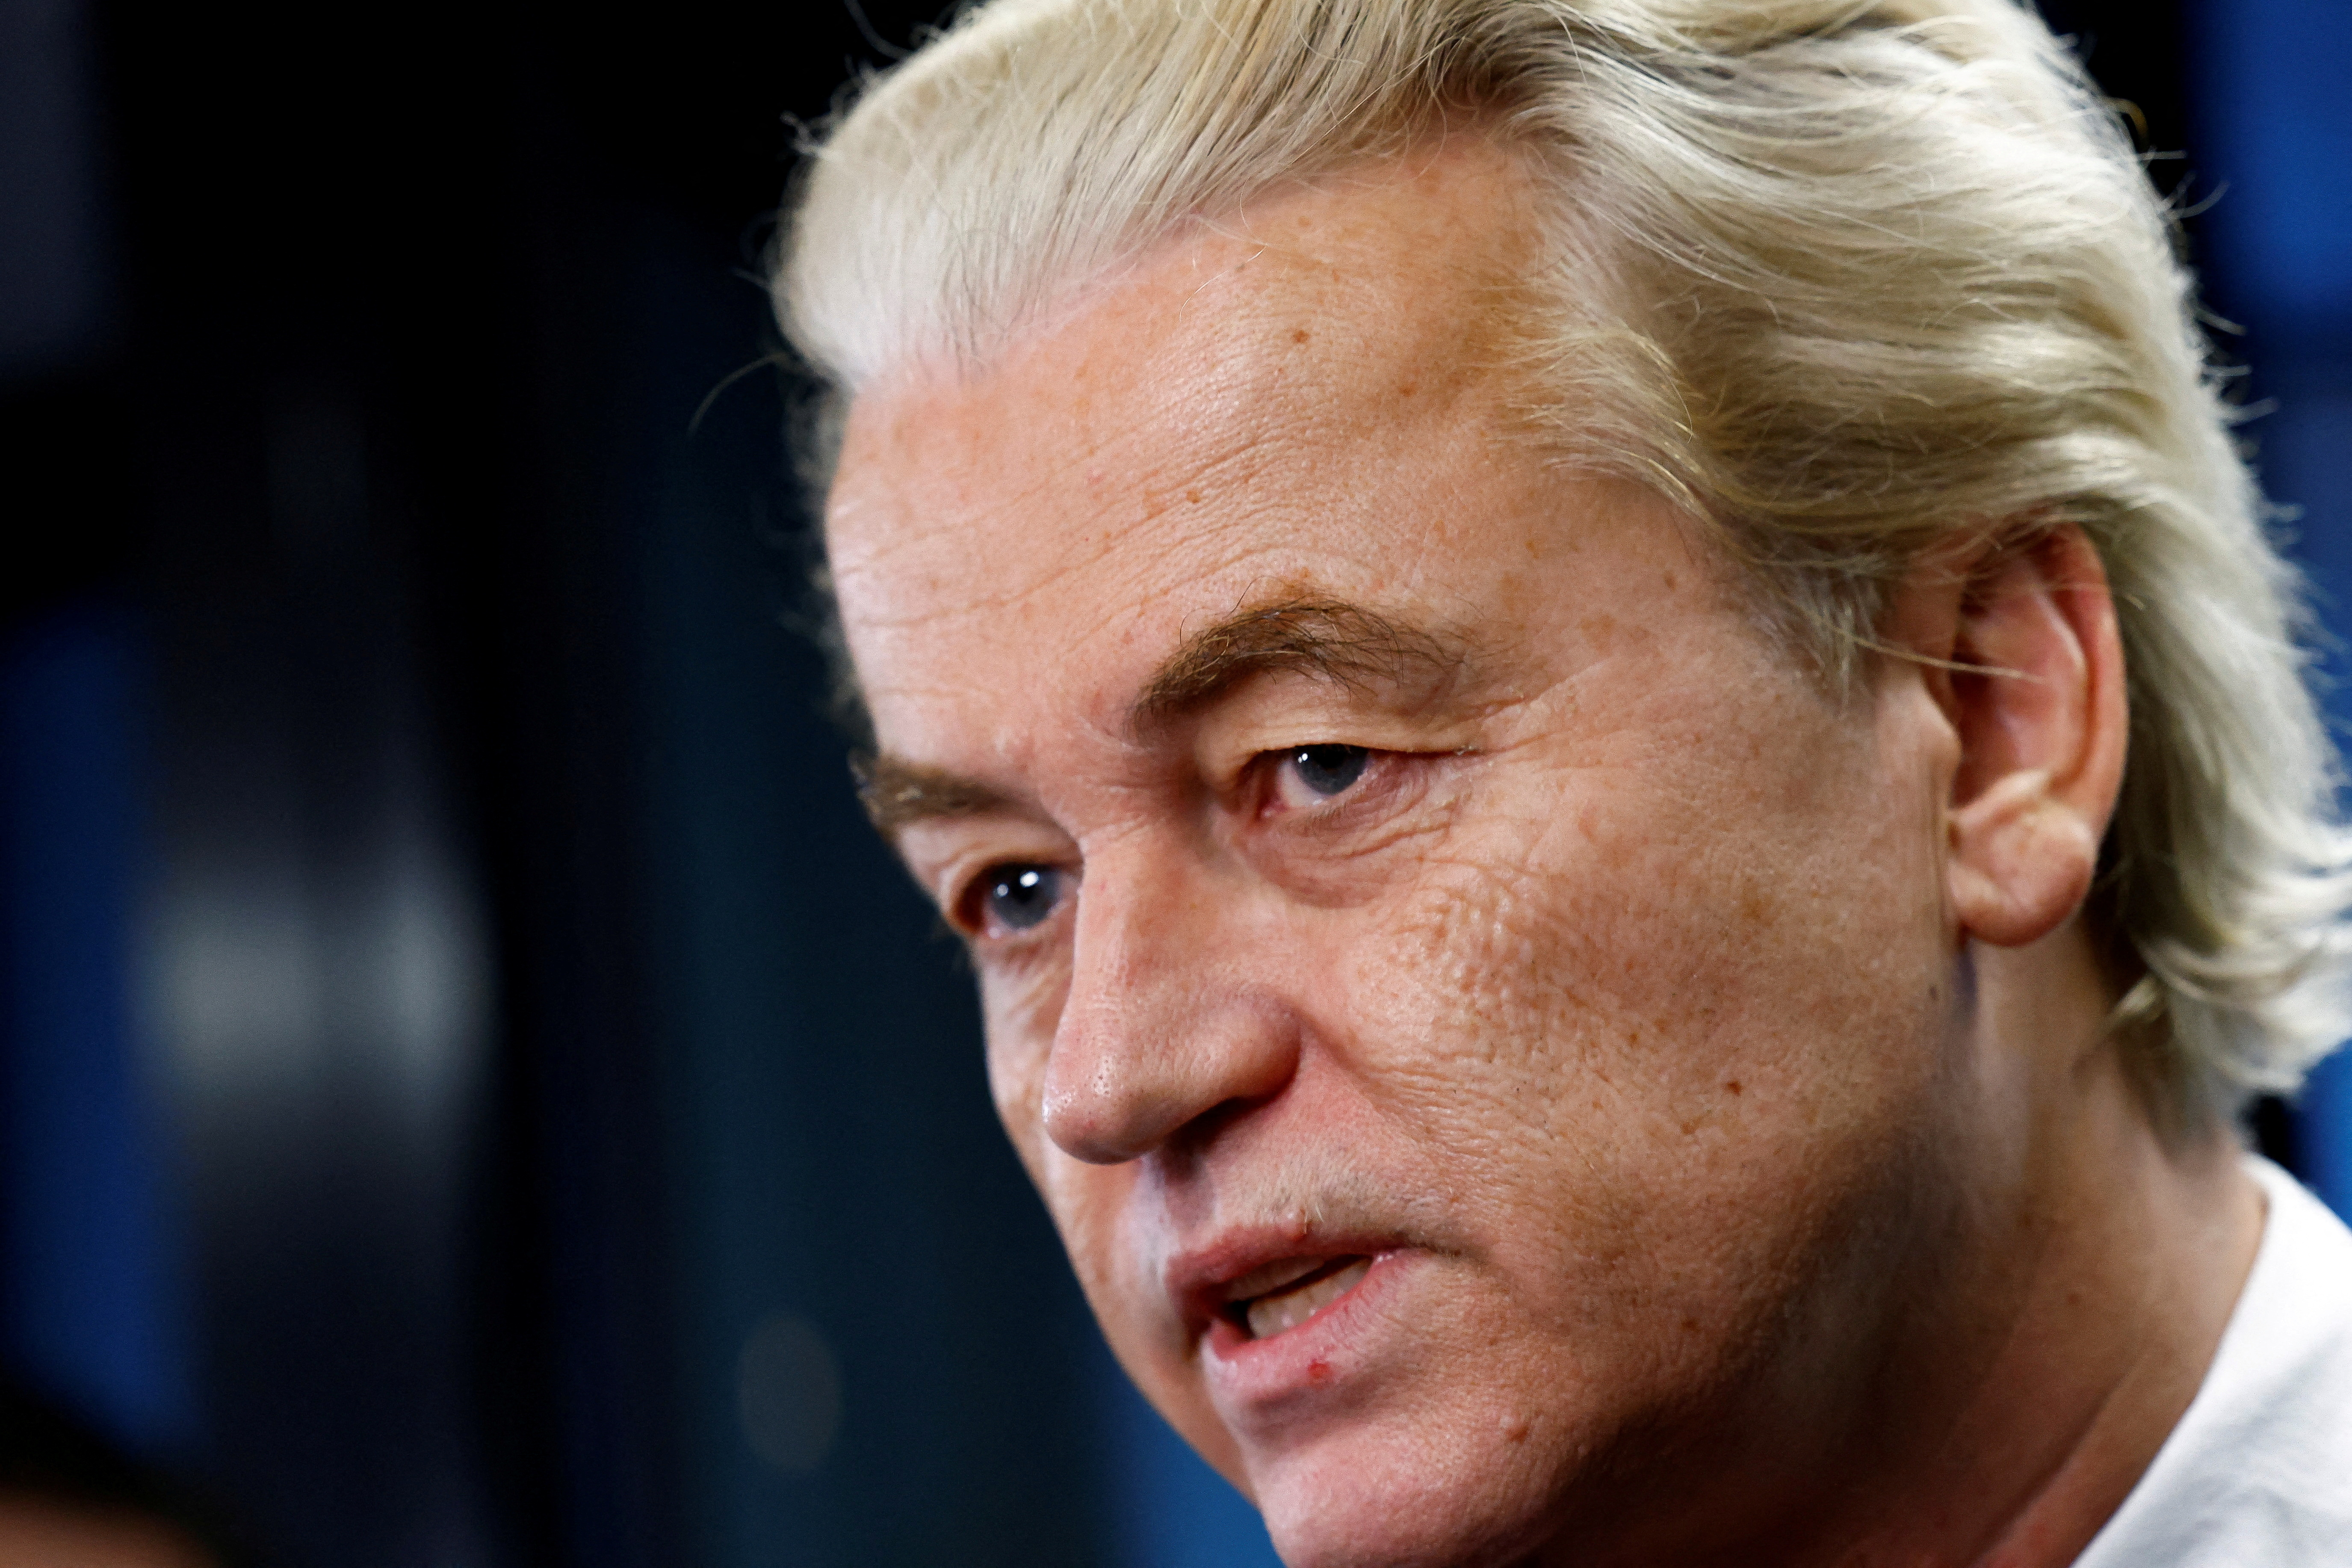 Dutch far-right politician and leader of the PVV party Geert Wilders reacts as he meets the press